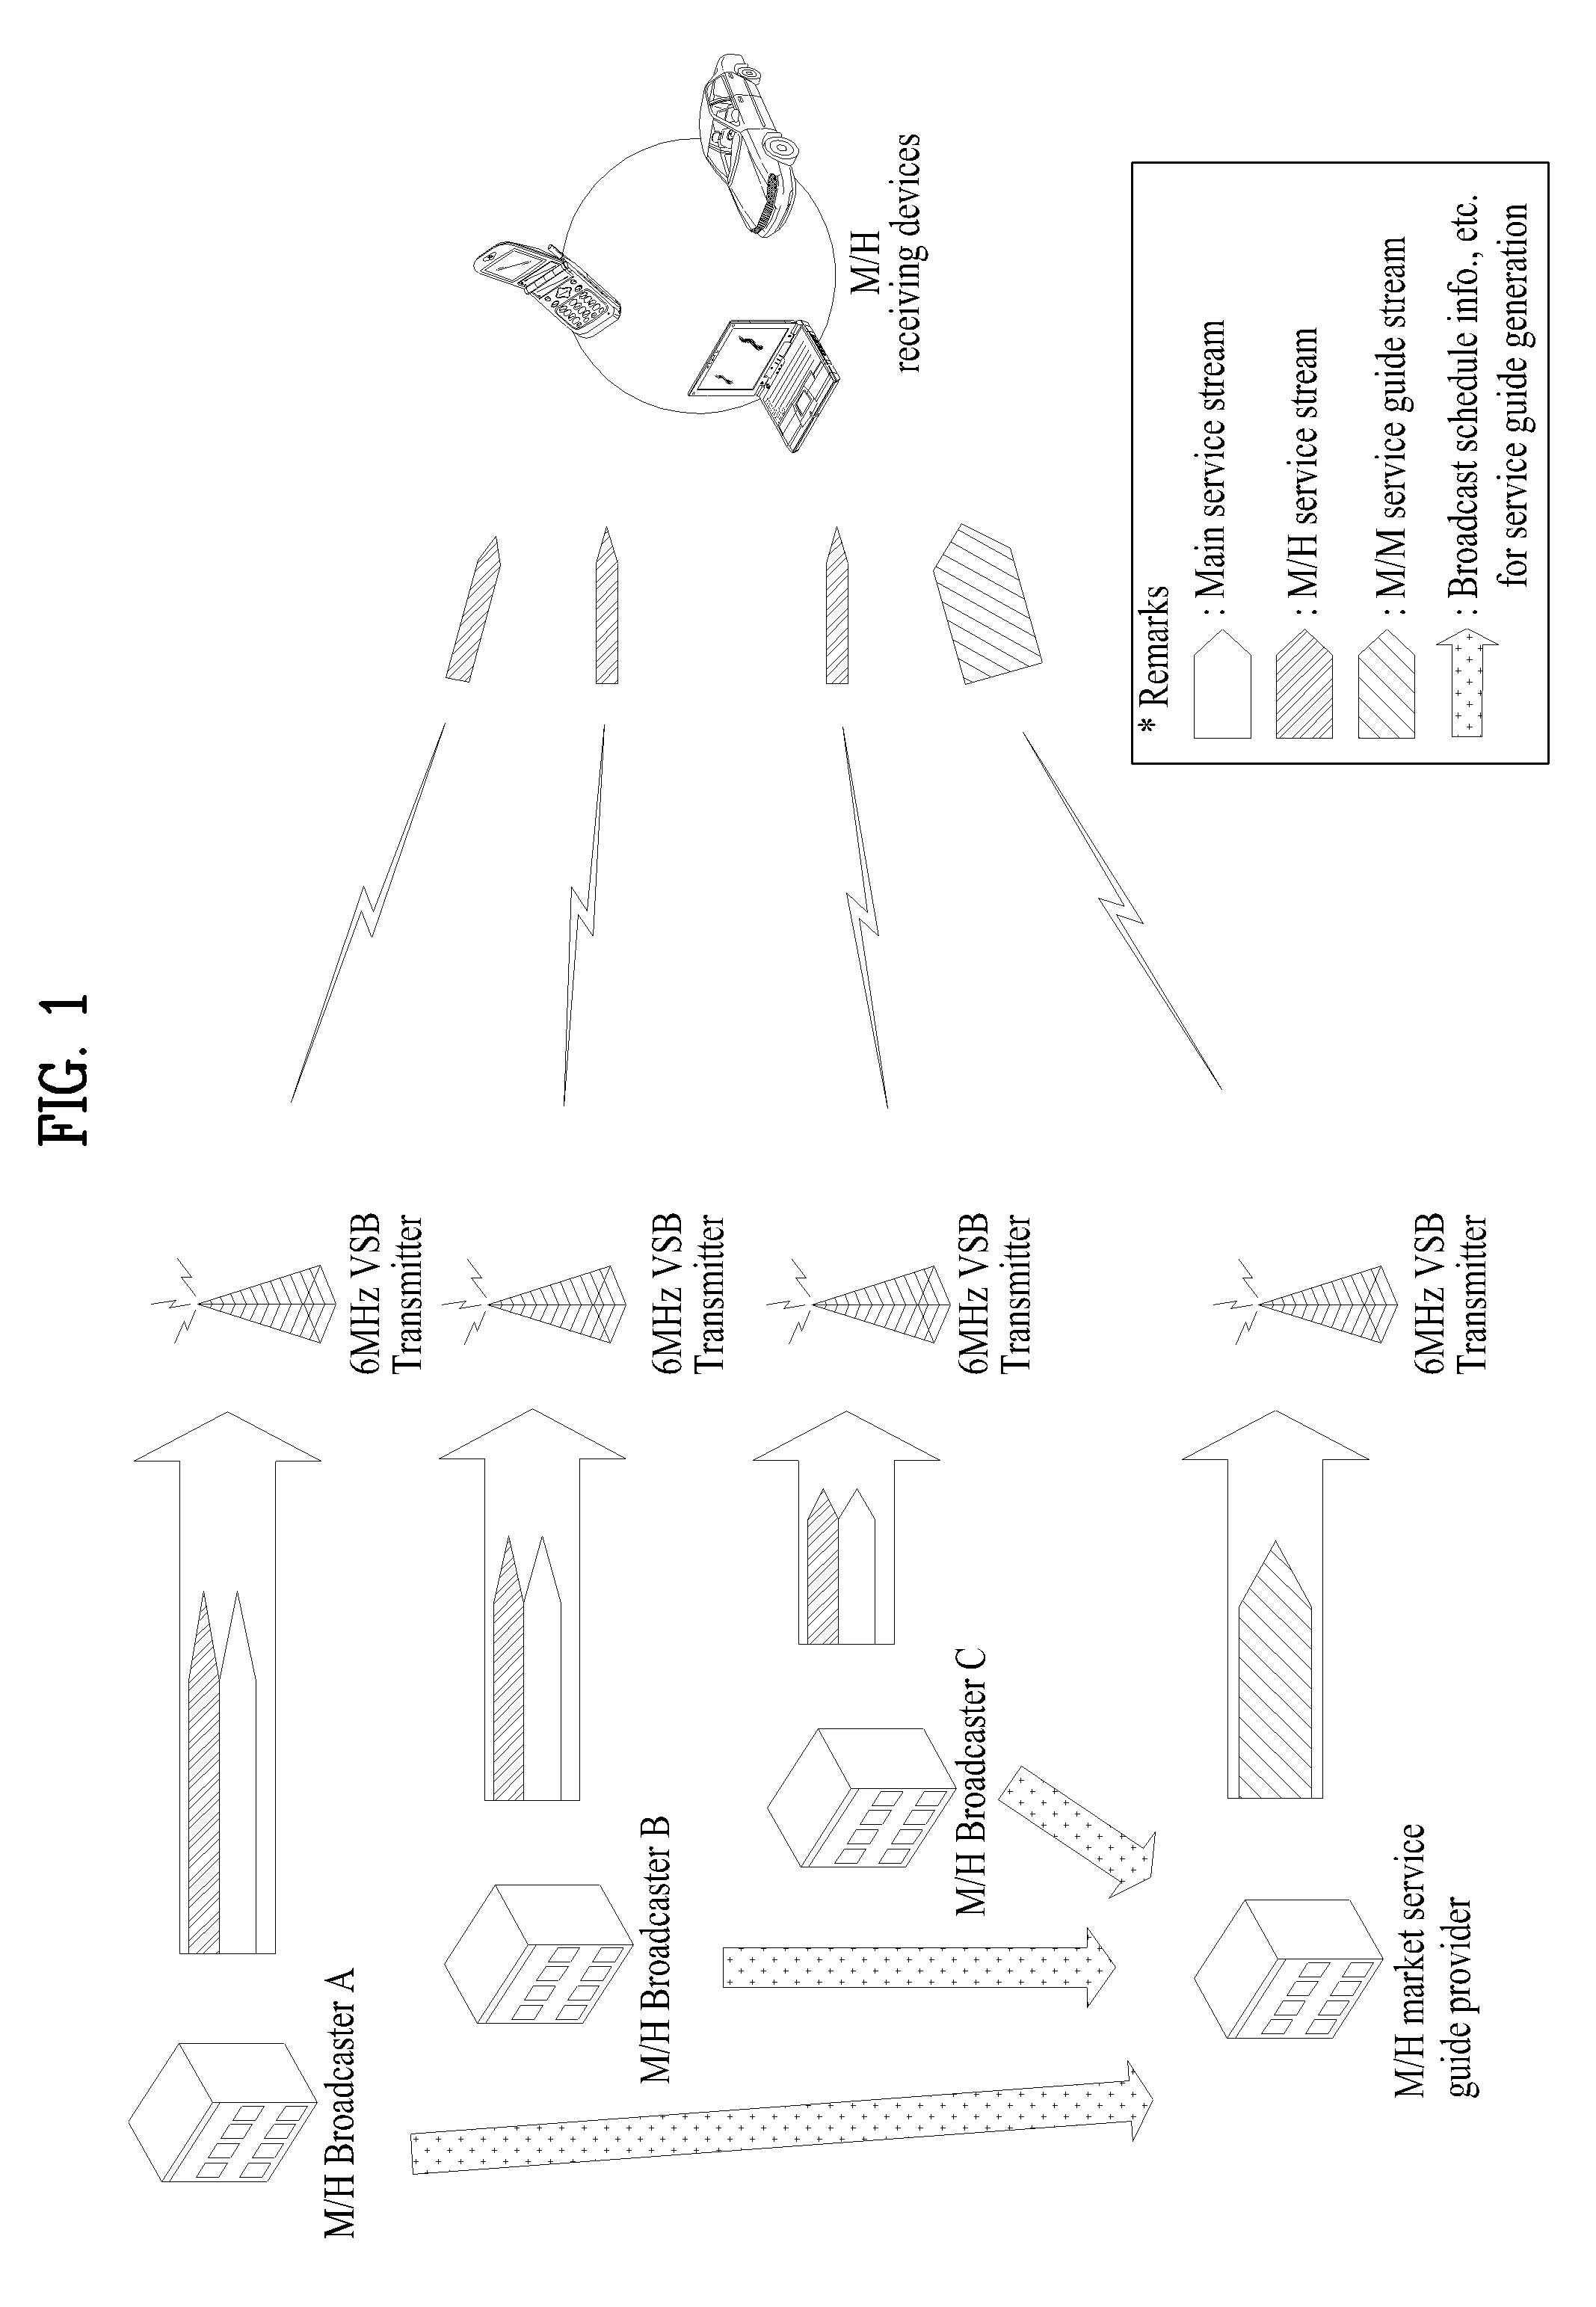 Transmitting/receiving system and method of processing data in the transmitting/receiving system